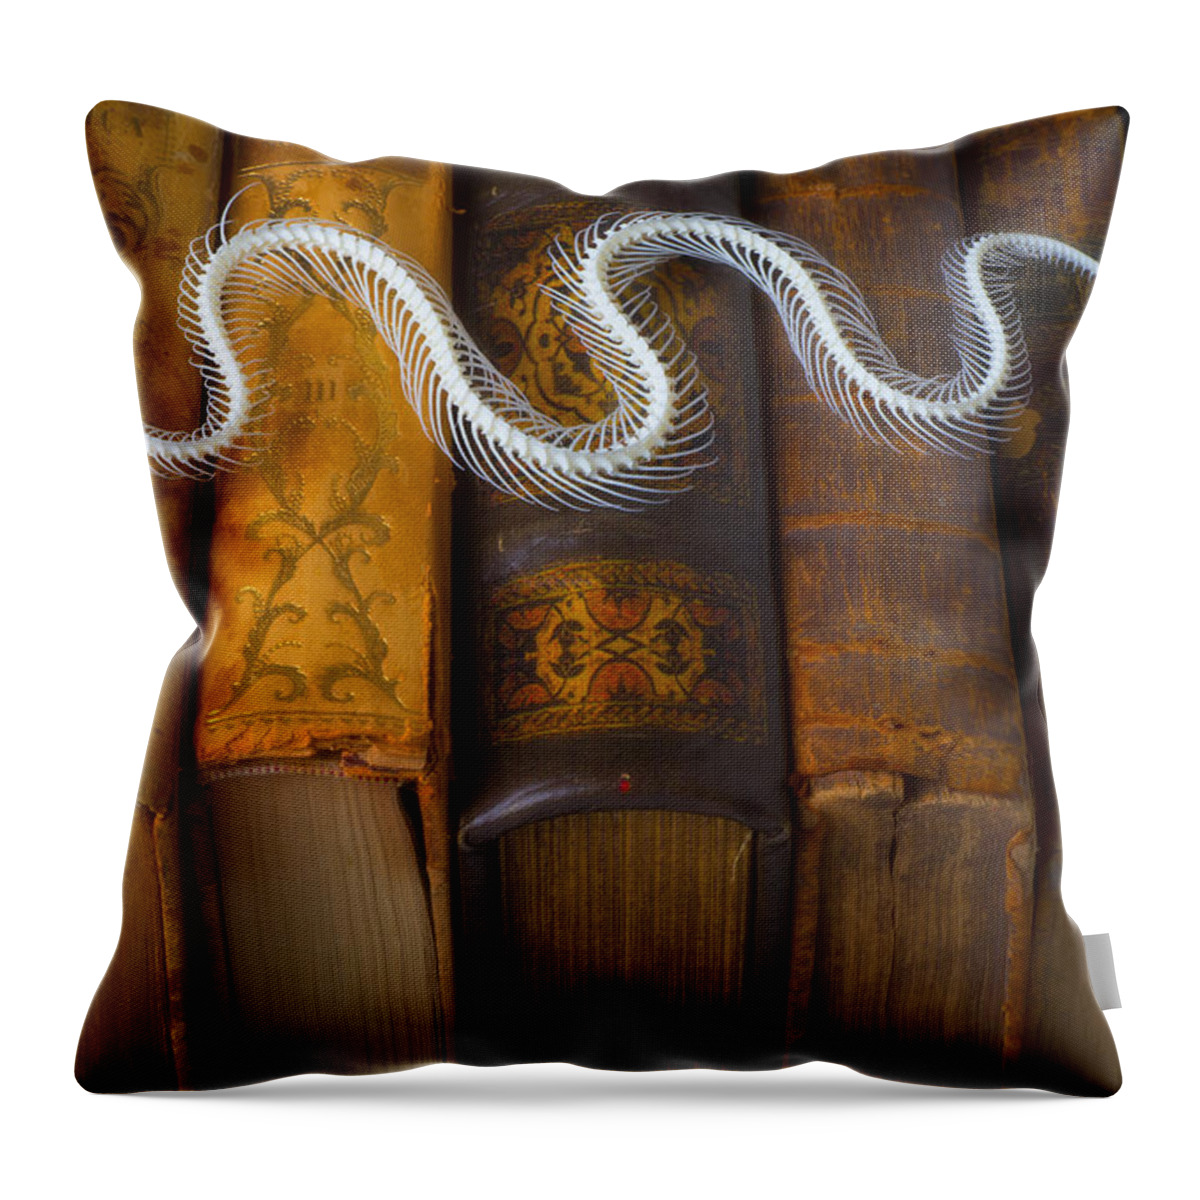 Snake Throw Pillow featuring the photograph Snake and antique books by Garry Gay